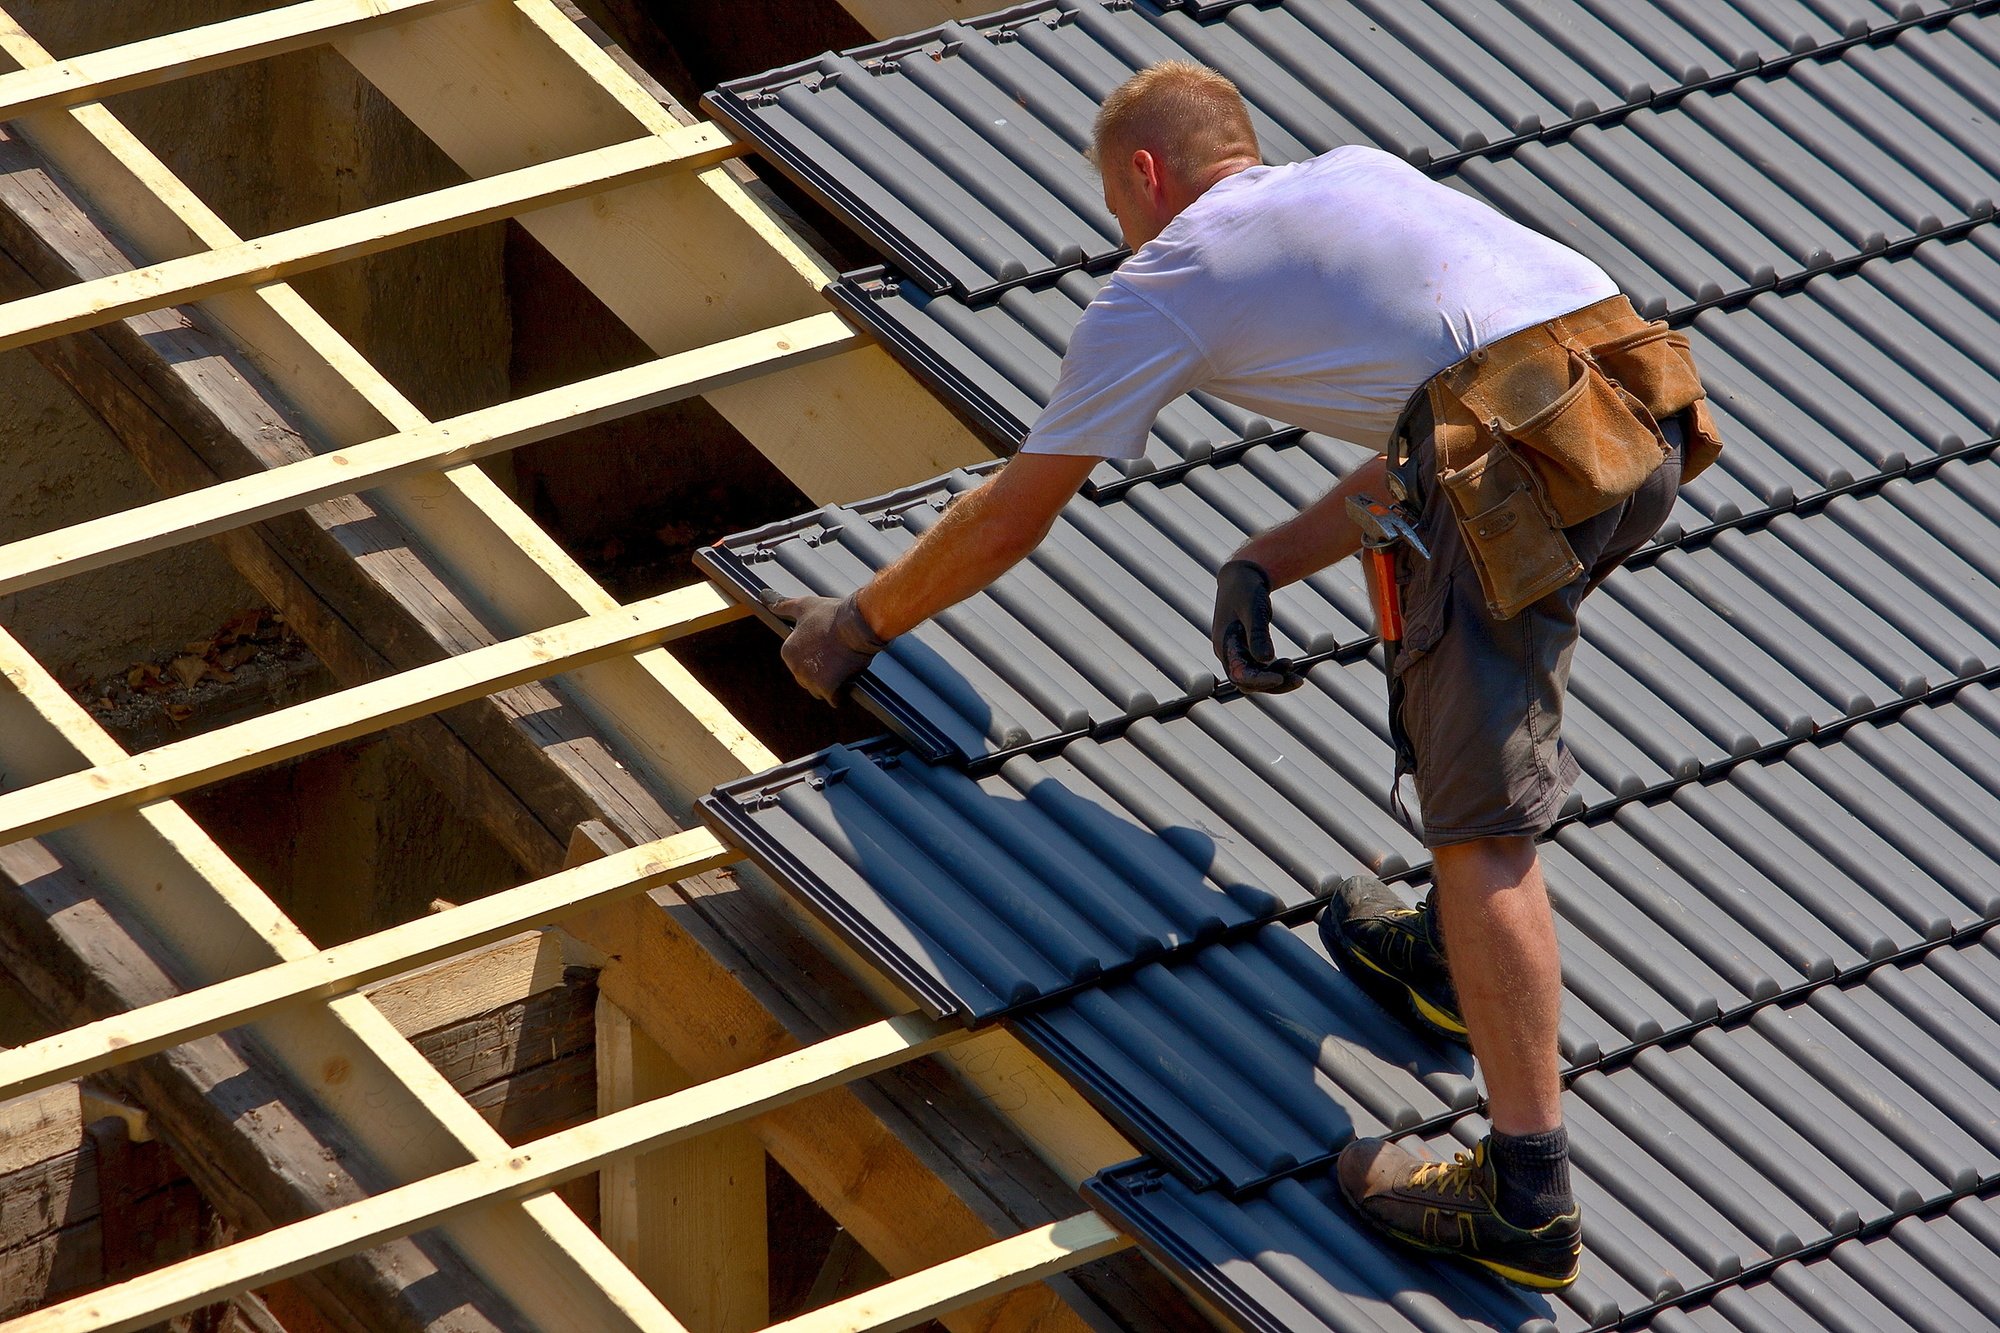 Are you planning on getting a new roof installed soon? Make sure to budget appropriately before your next roofing job with these tips.